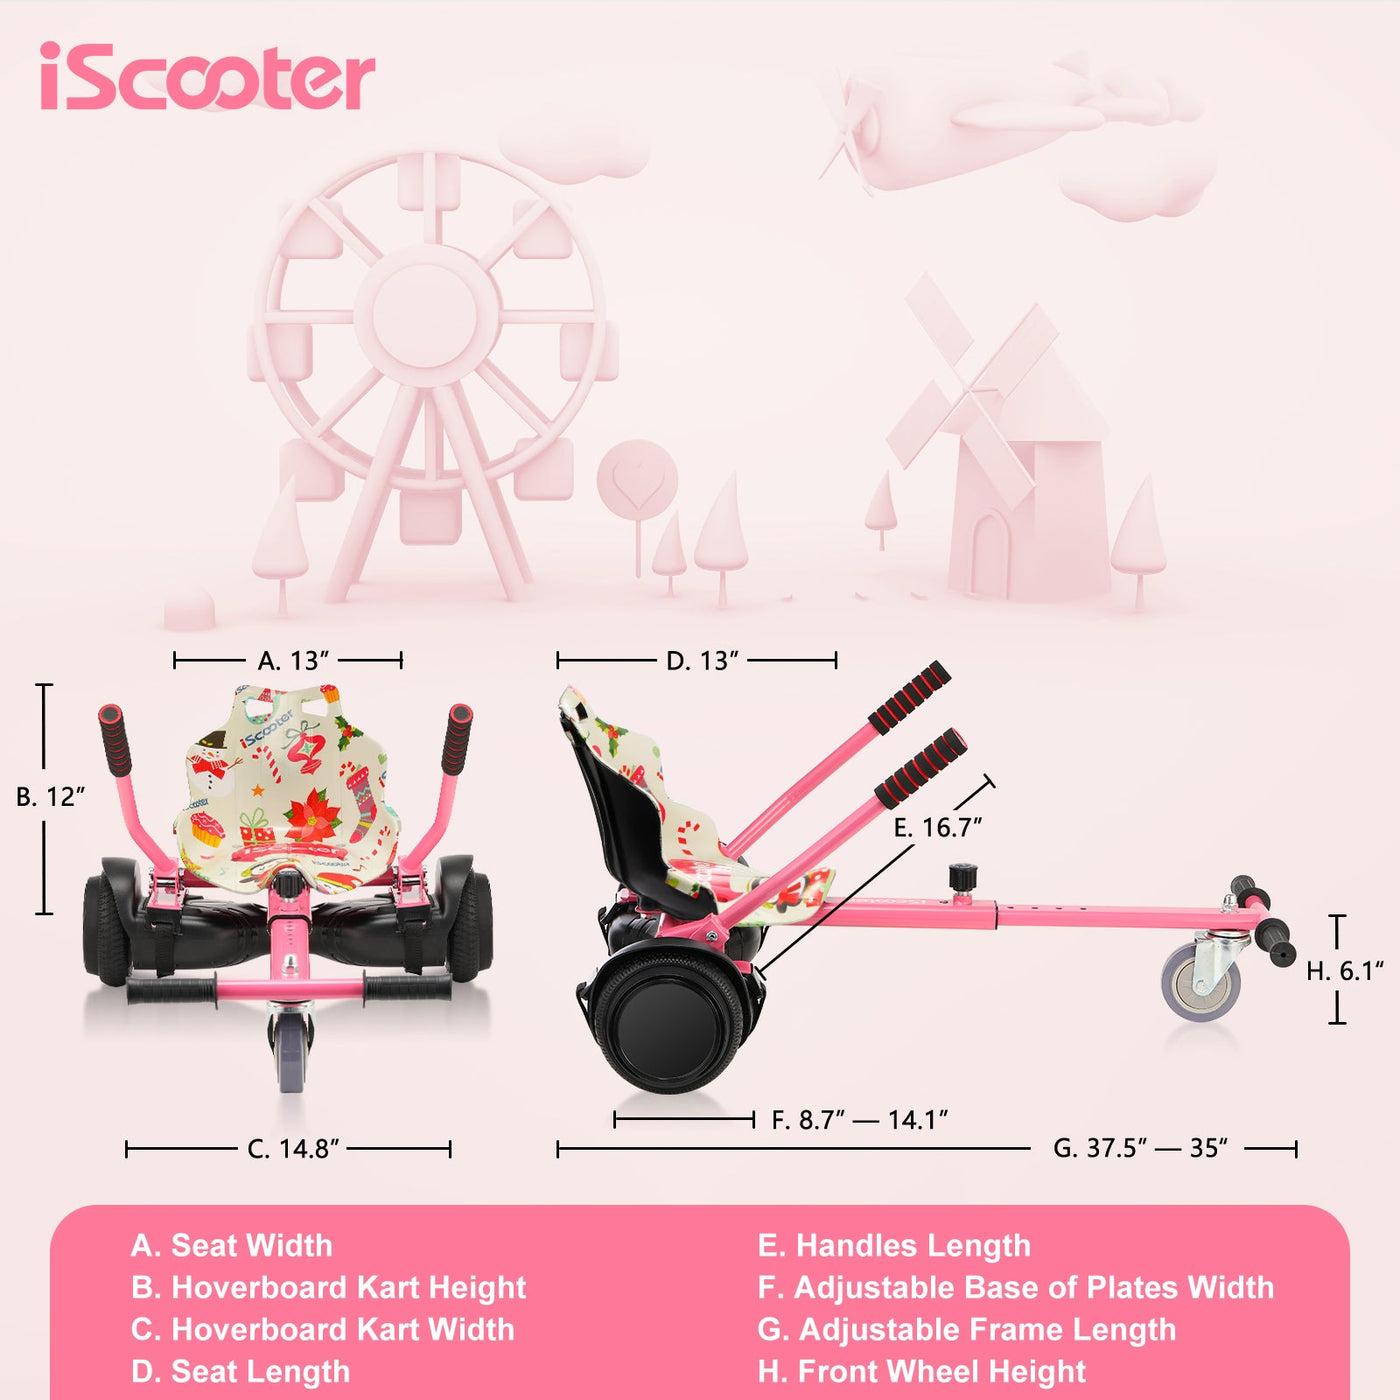 iScooter Q1 Go Kart red Hoverboard avec Siège